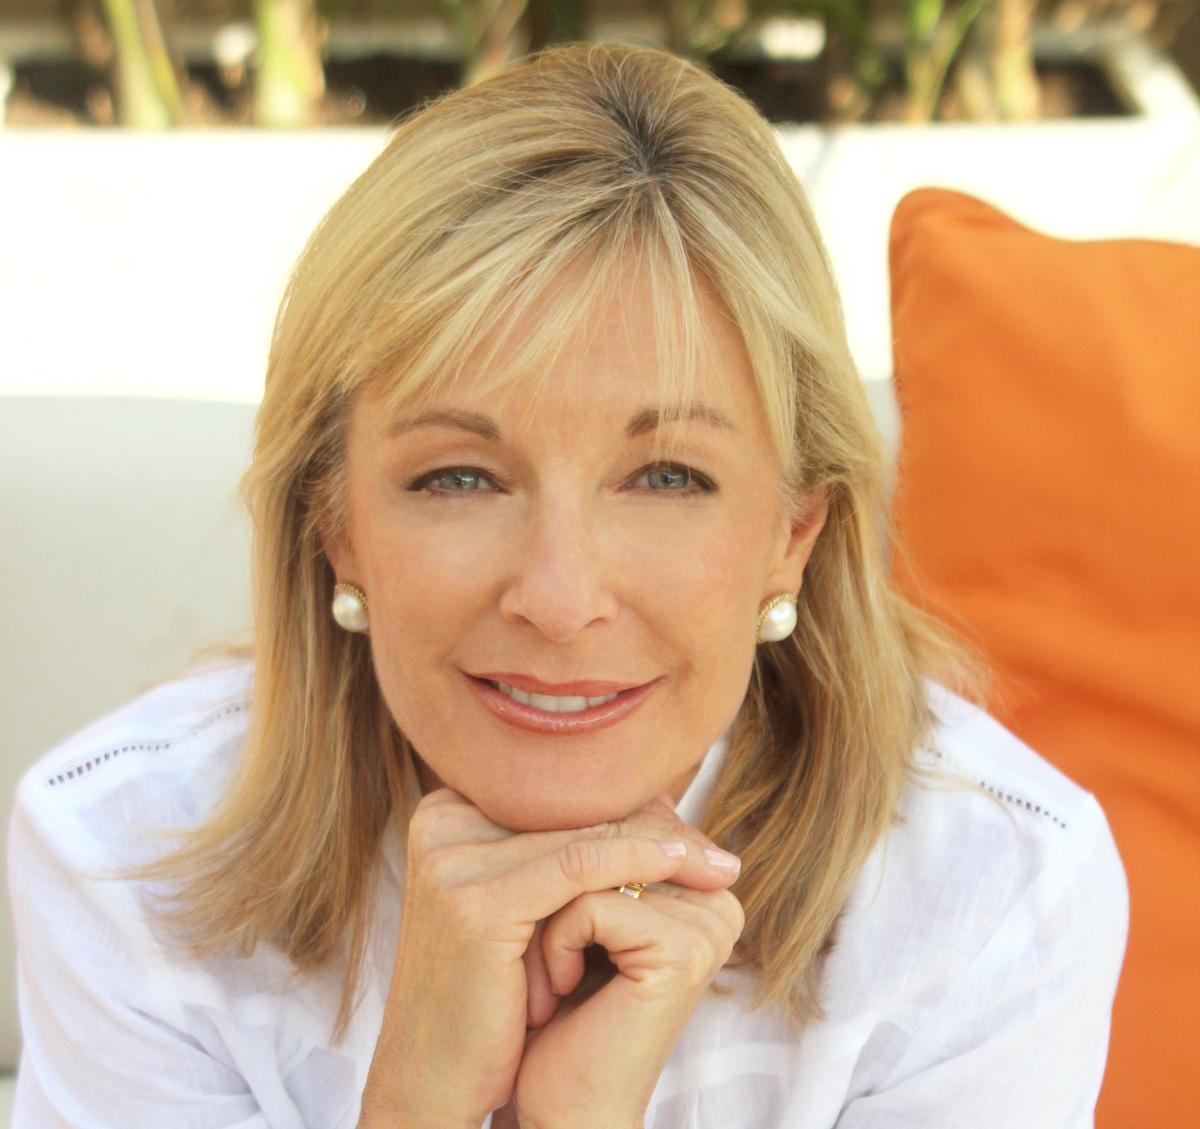 Susie Ellis believes that wellness tourism is growing steadily across the Middle East / 